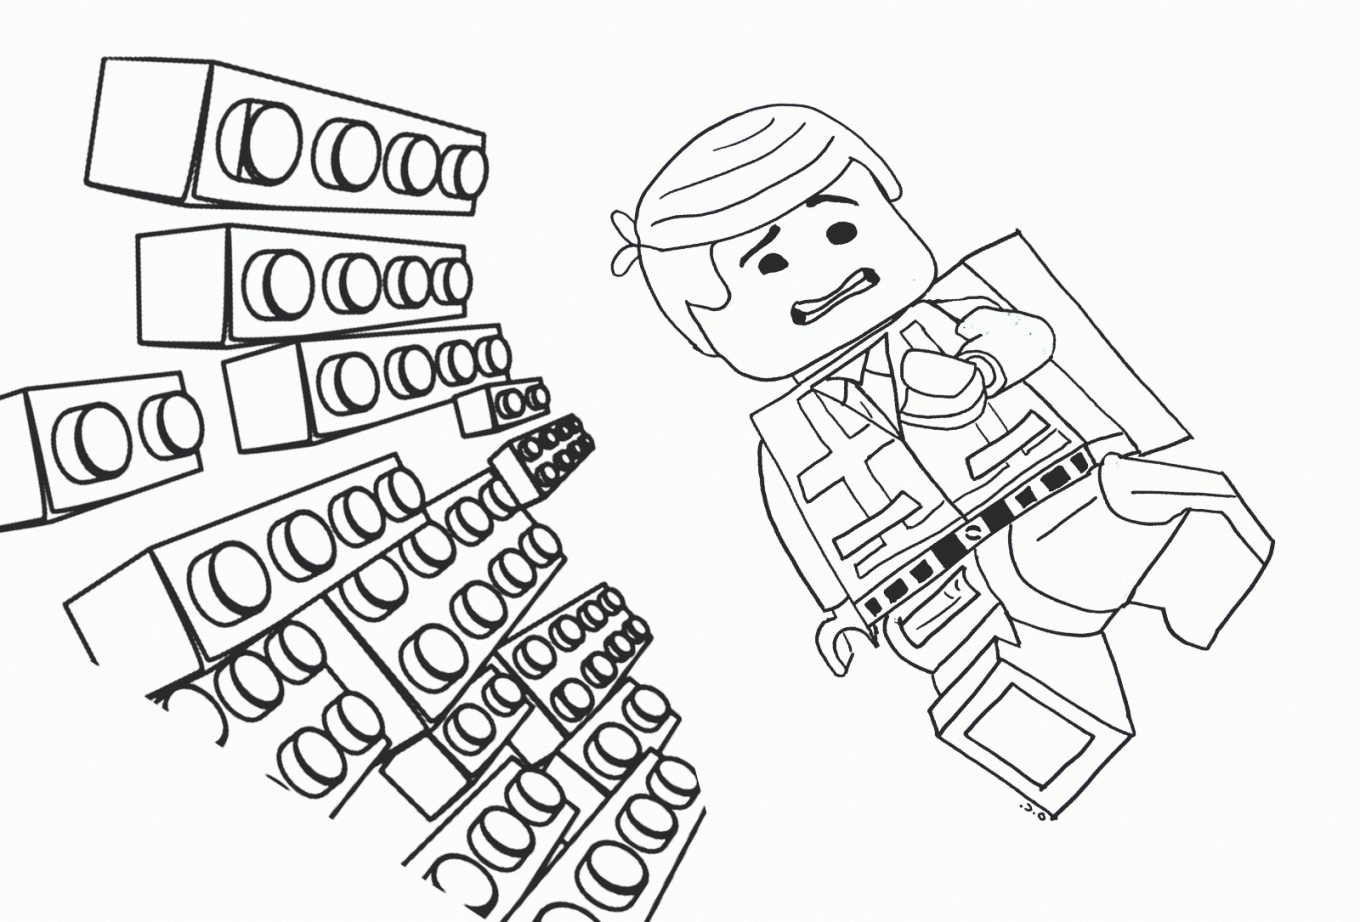 Brick House Coloring Pages at GetColorings.com | Free printable